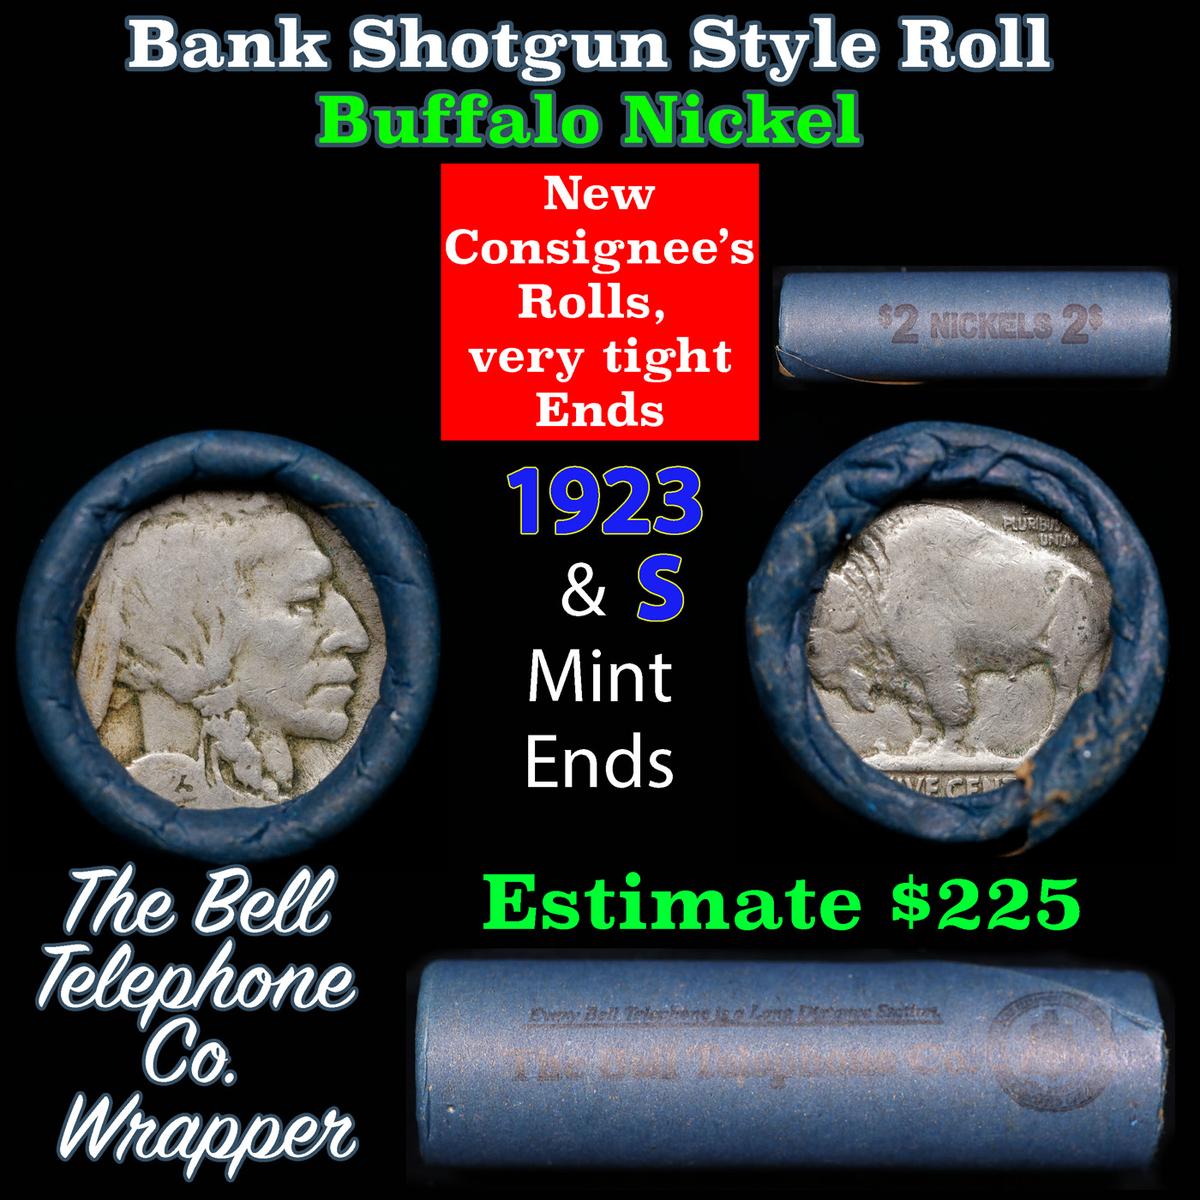 Buffalo Nickel Shotgun Roll in Old Bank Style 'Bell Telephone' Wrapper 1923 & s Mint Ends